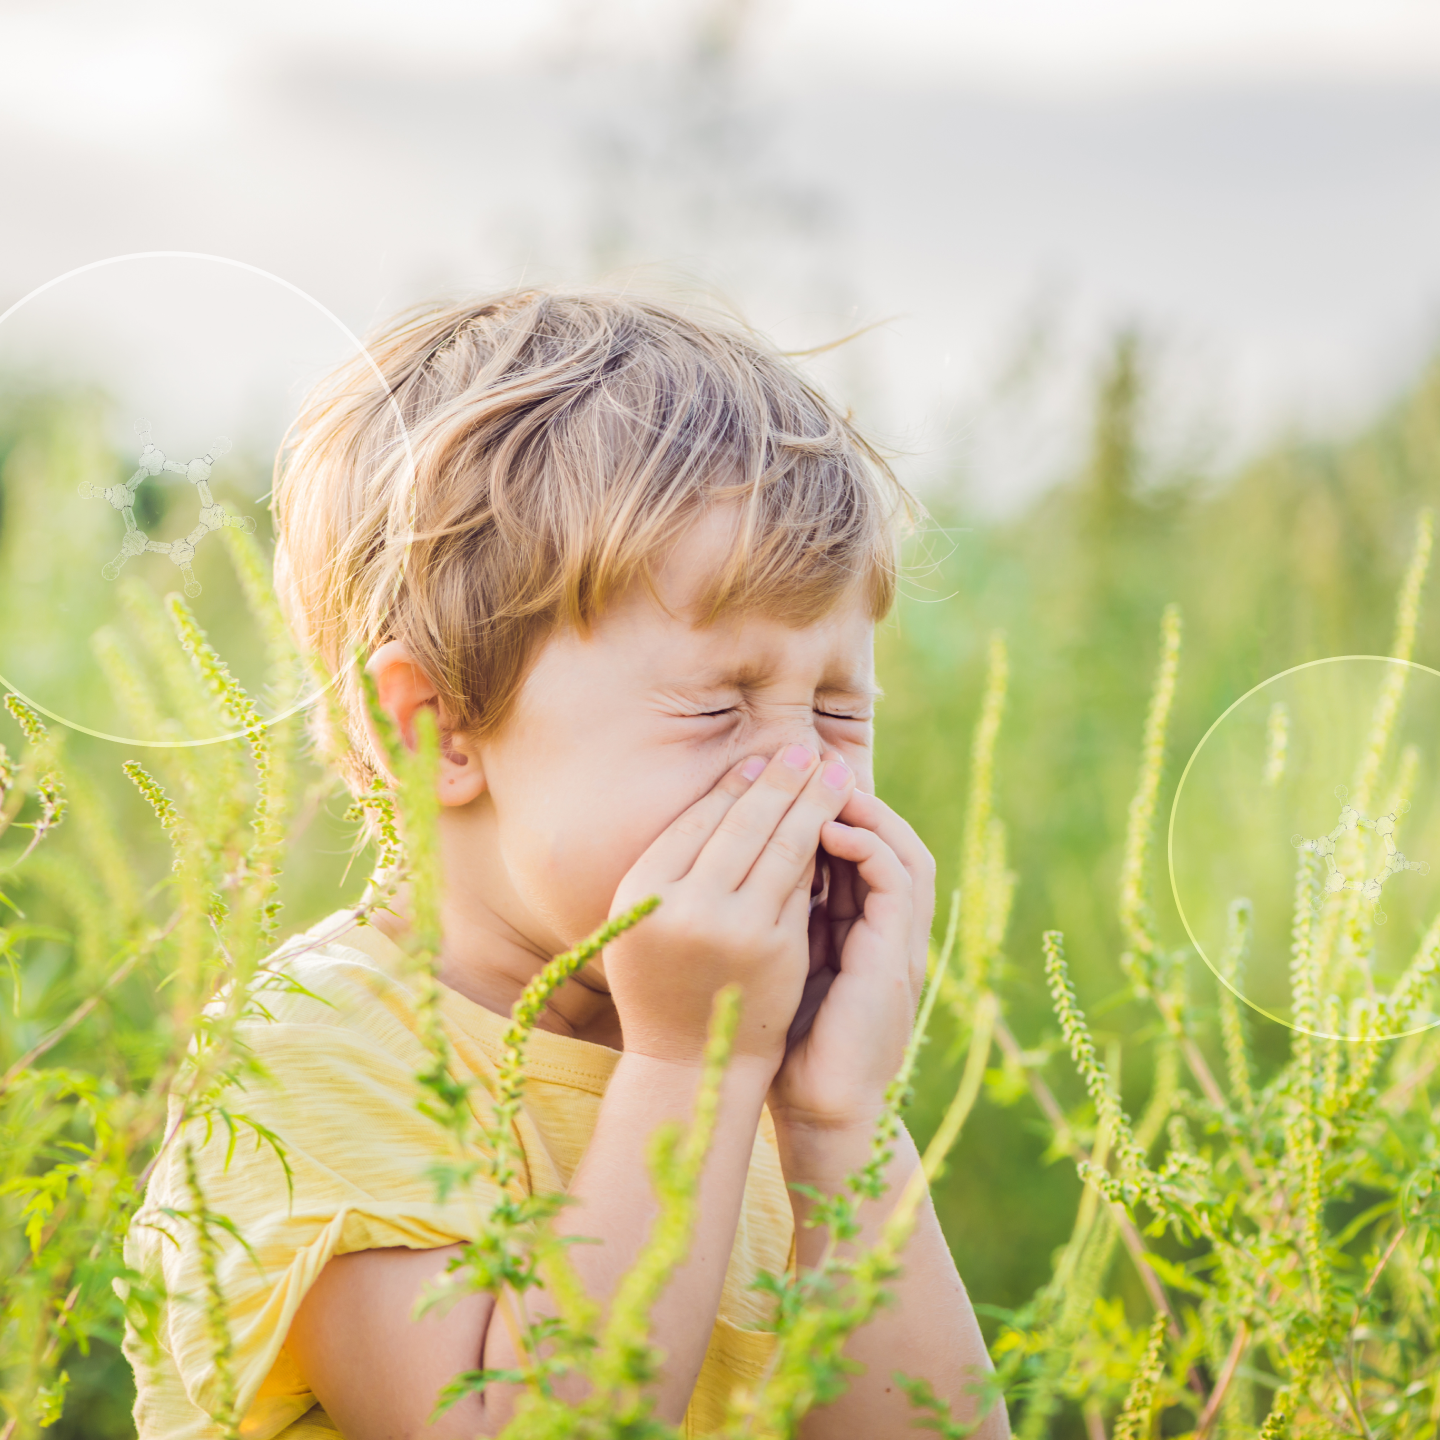 Child sneezing in a field of weeds